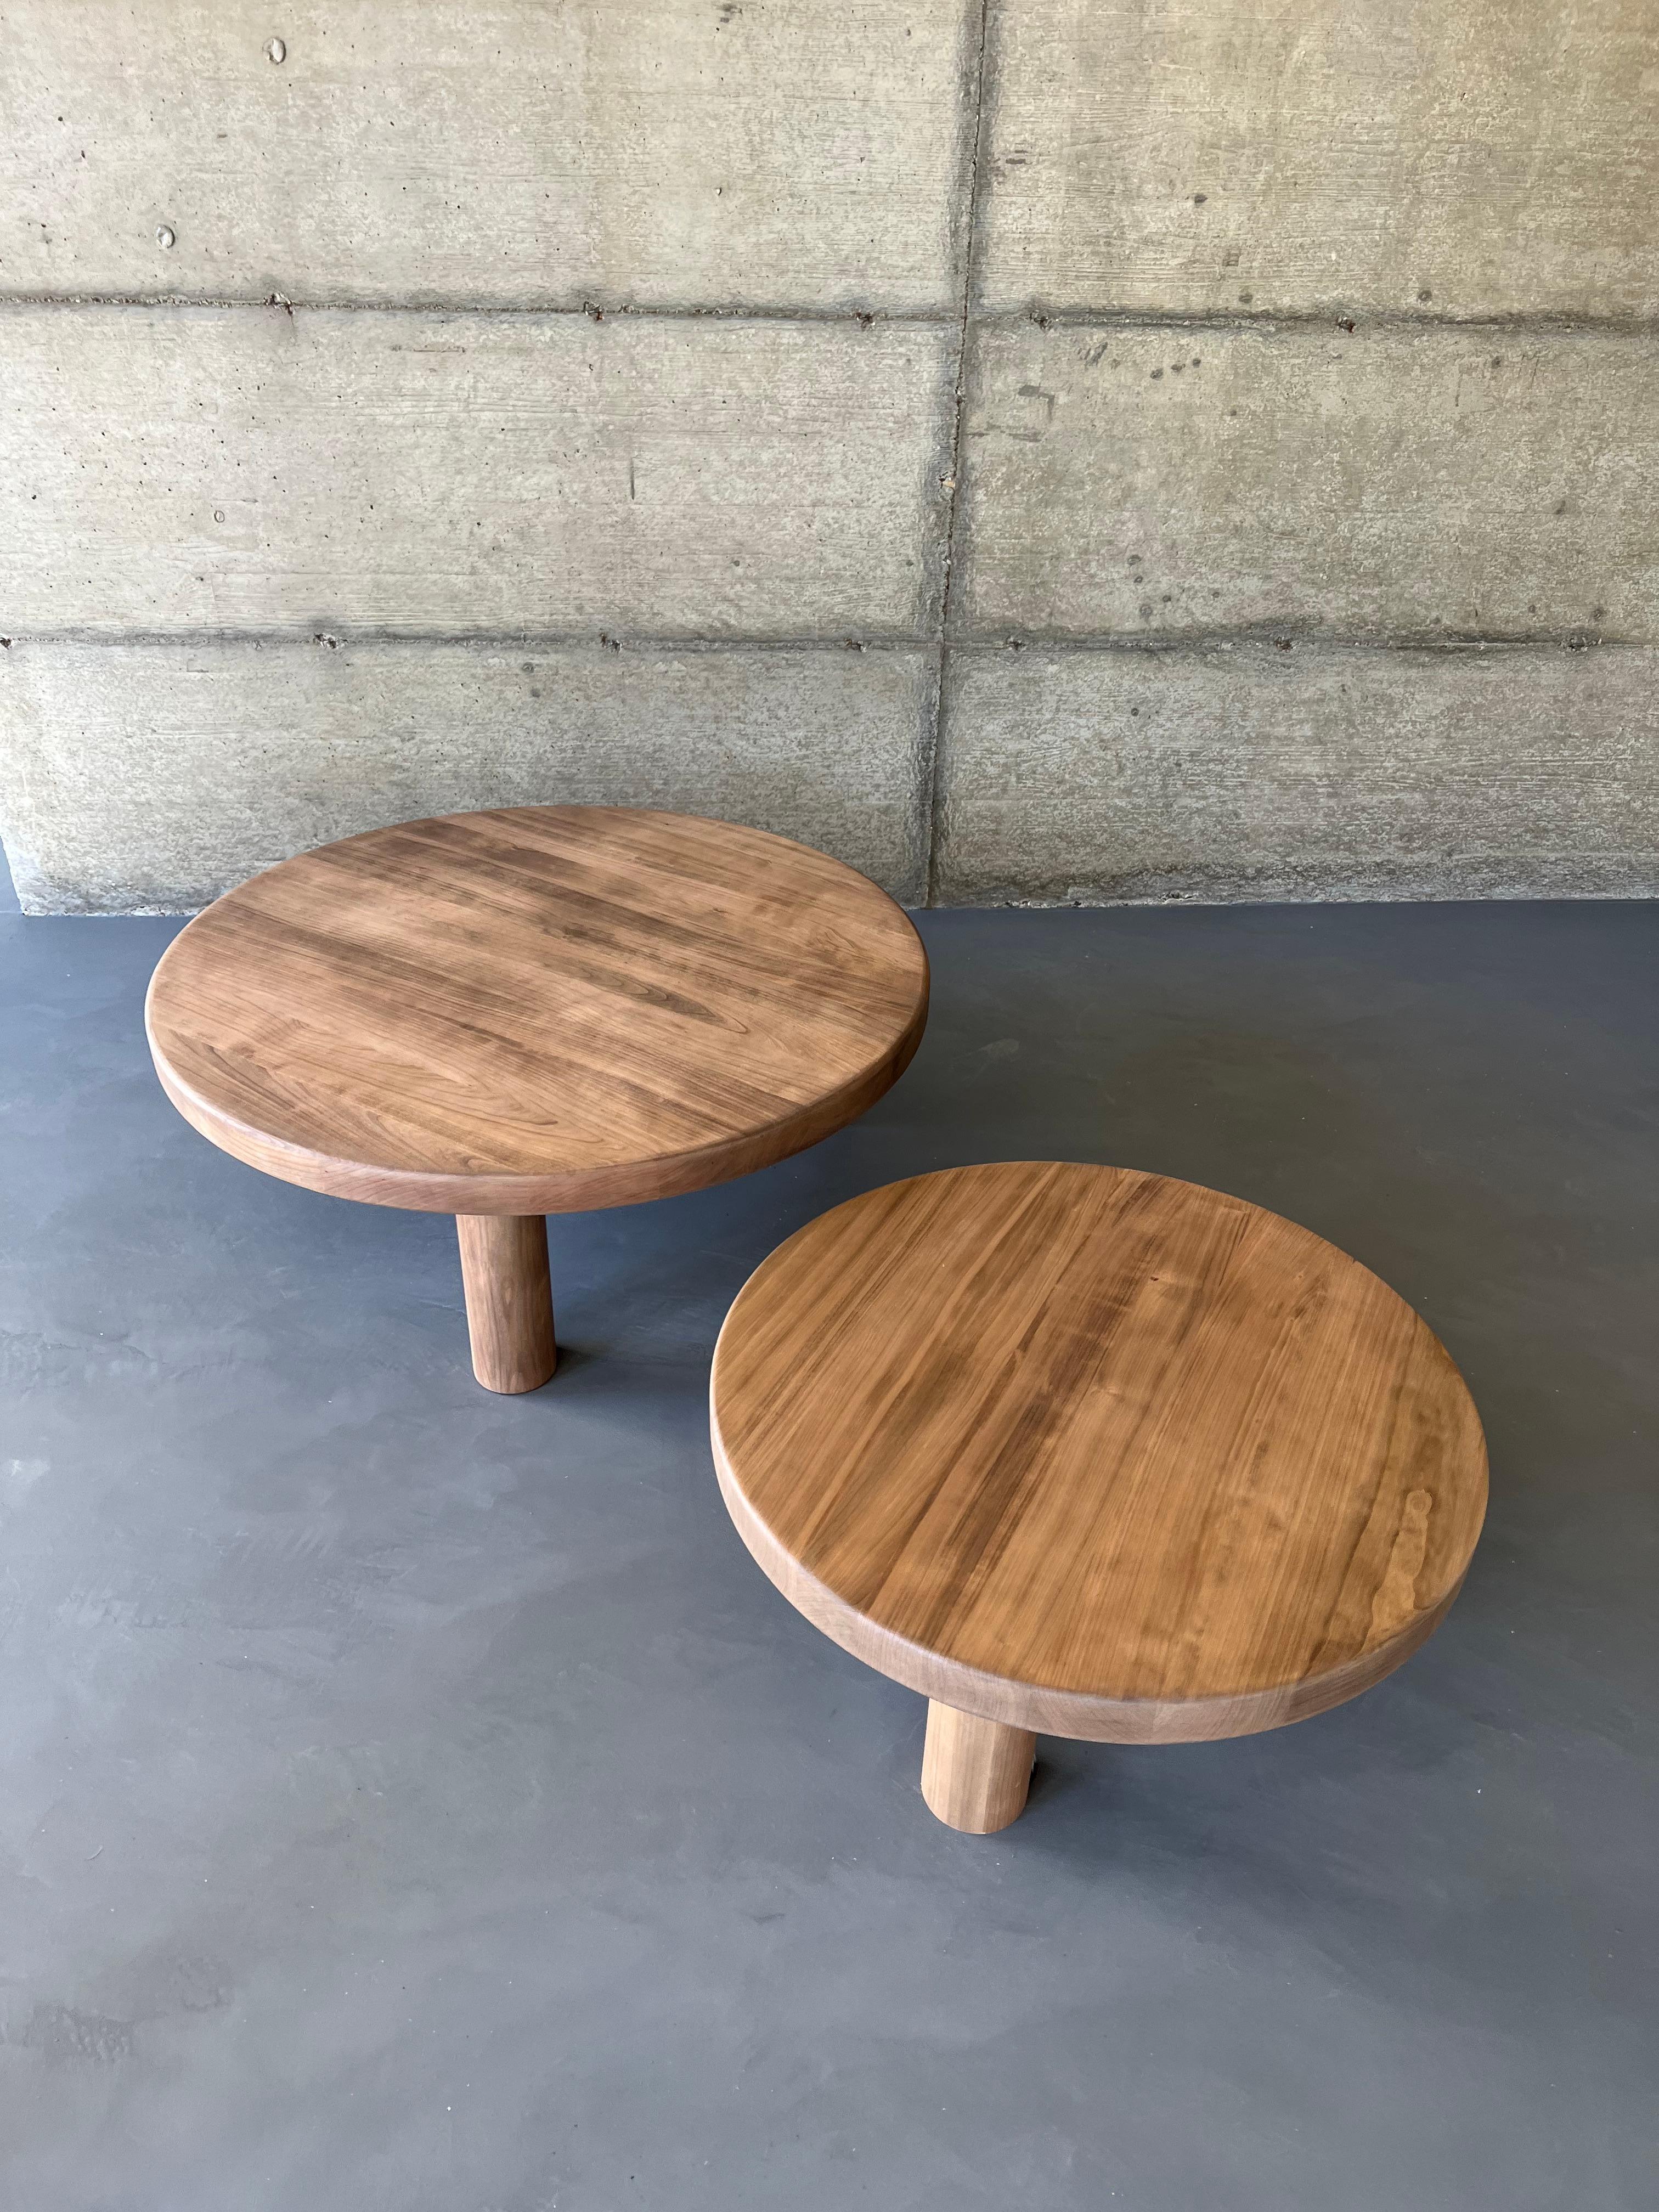 Duo of Mid-Century Style Coffee Tables in Solid Cherry Wood 4